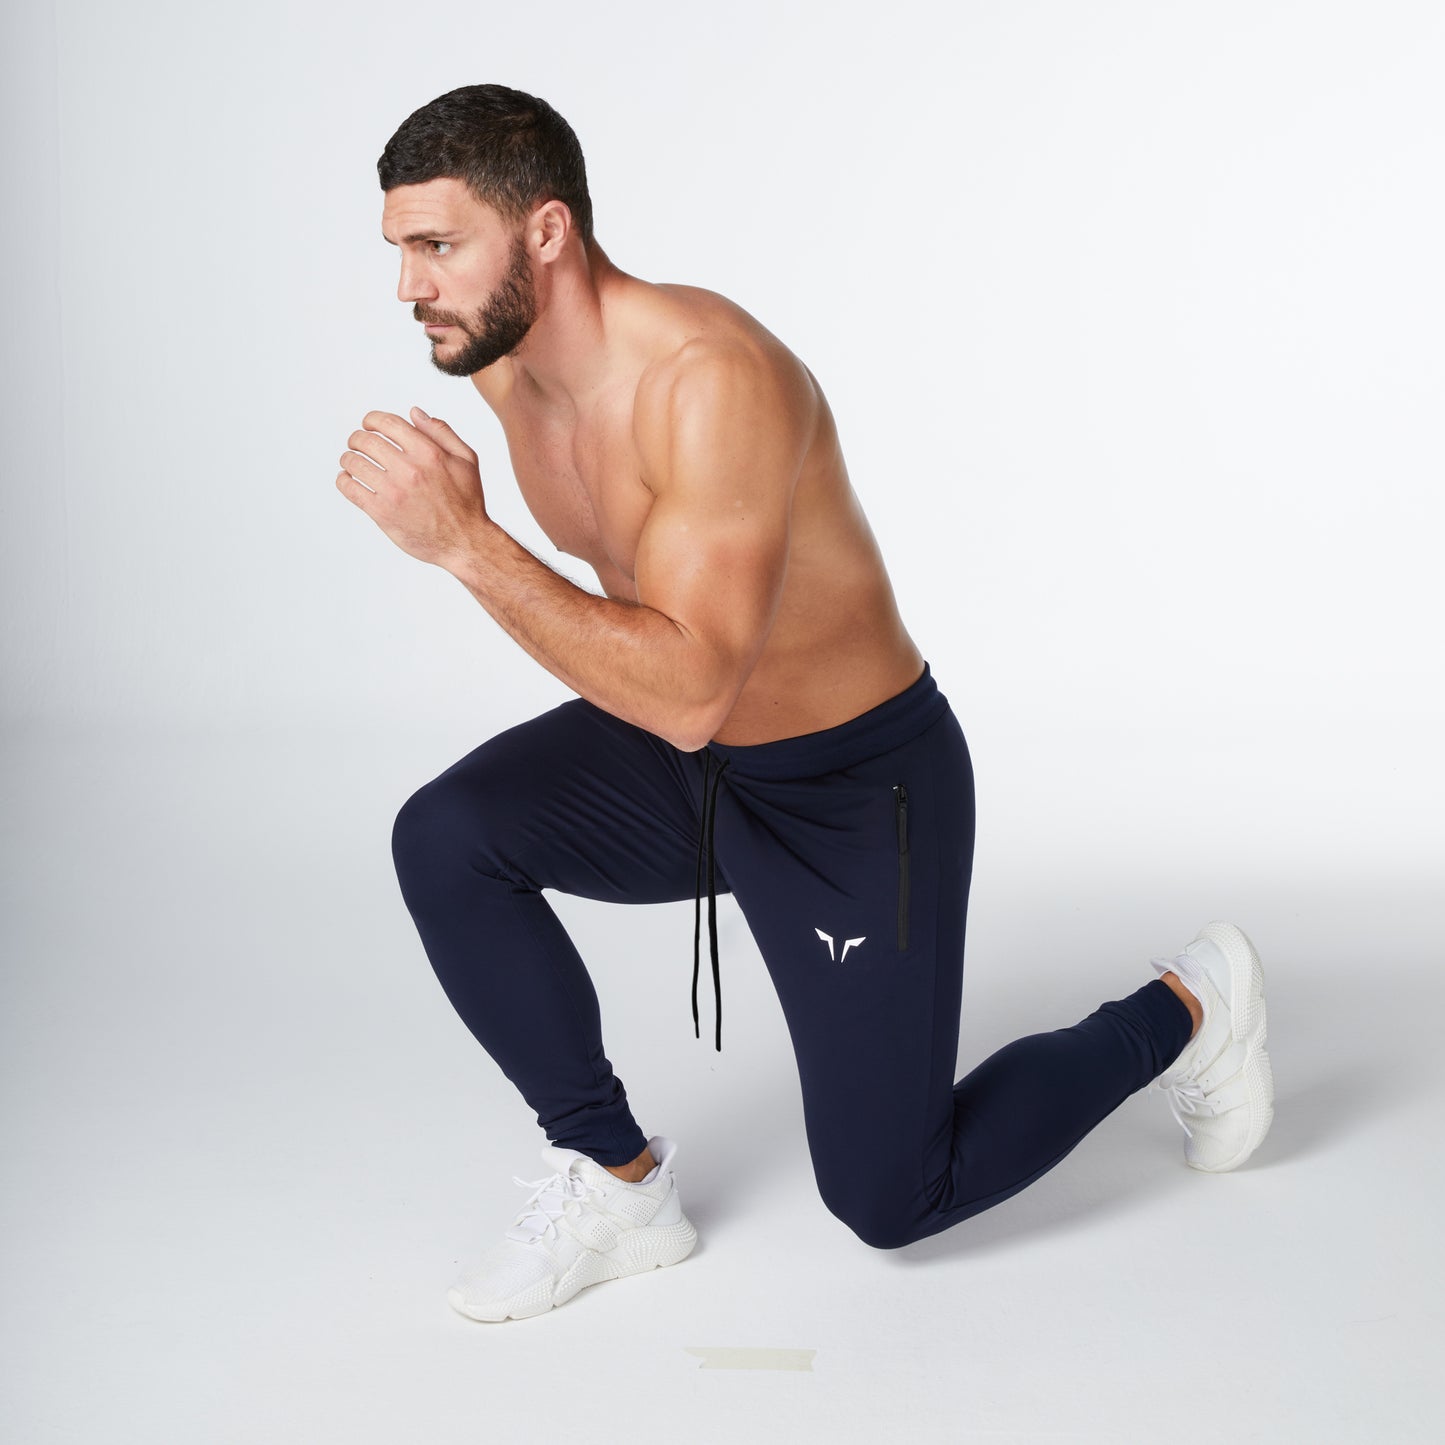 squatwolf-gym-wear-statement-classic-joggers-navy-workout-joggers-for-men